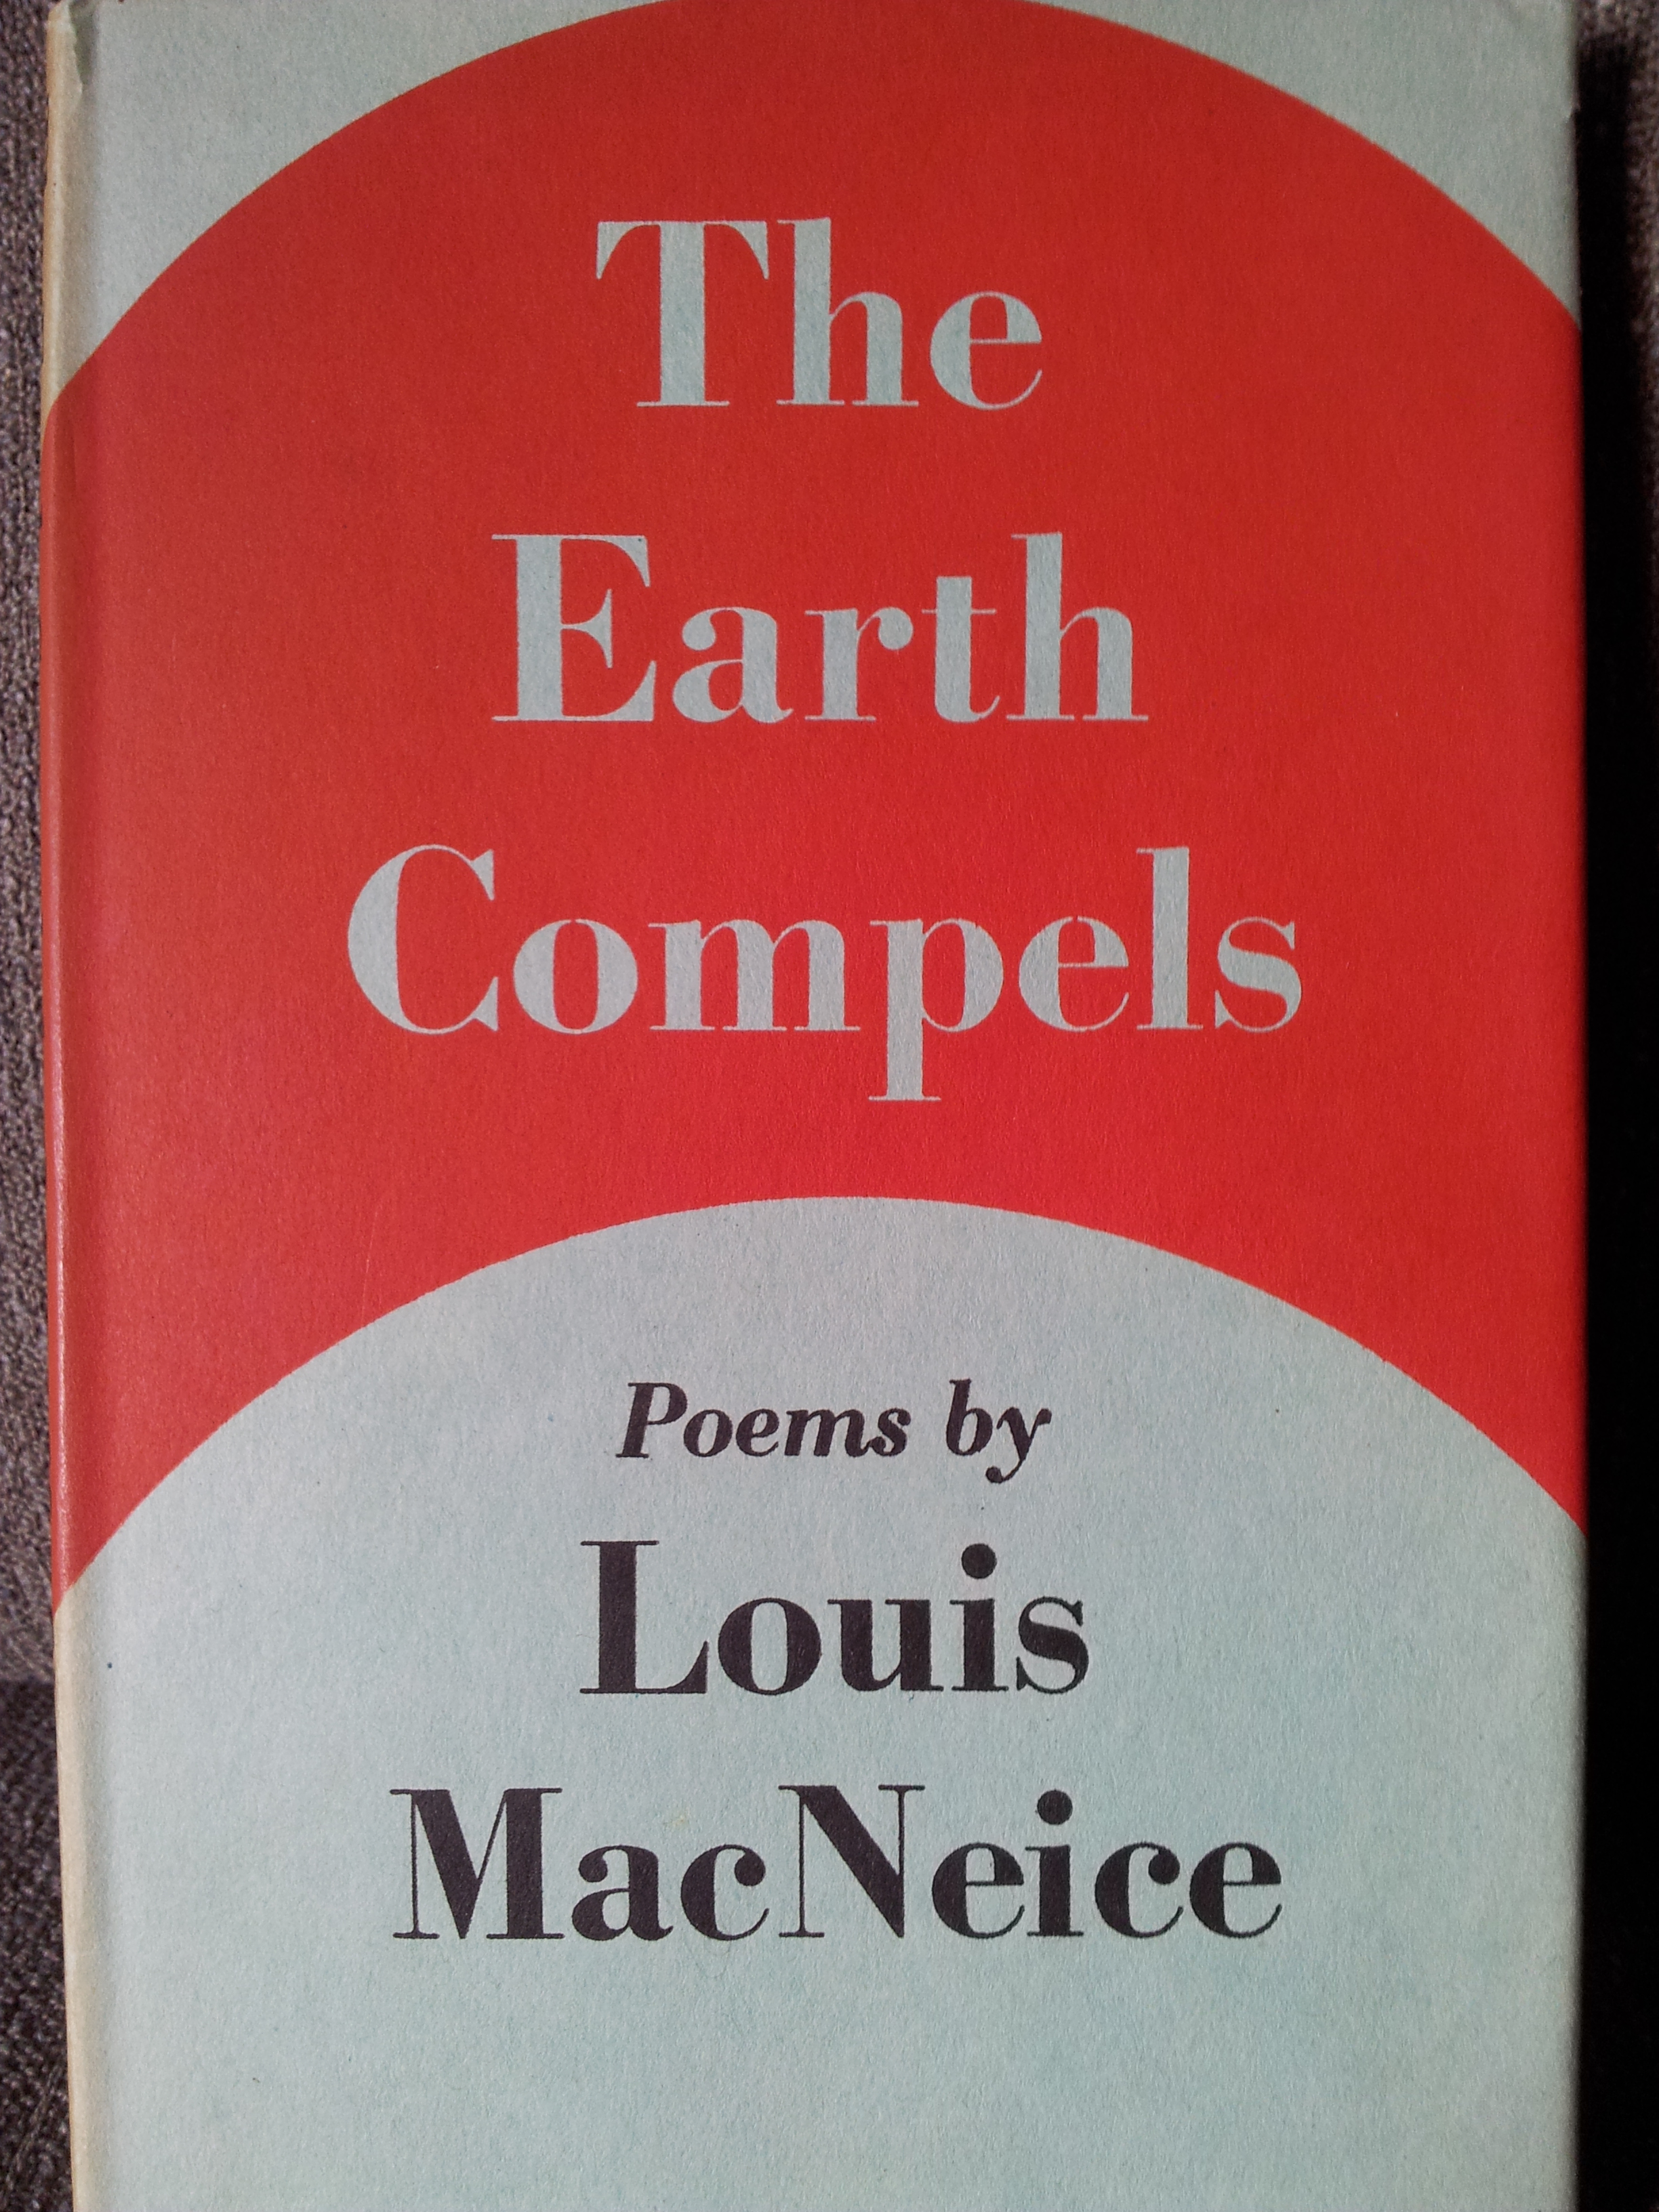 The Earth Compels dust jacket